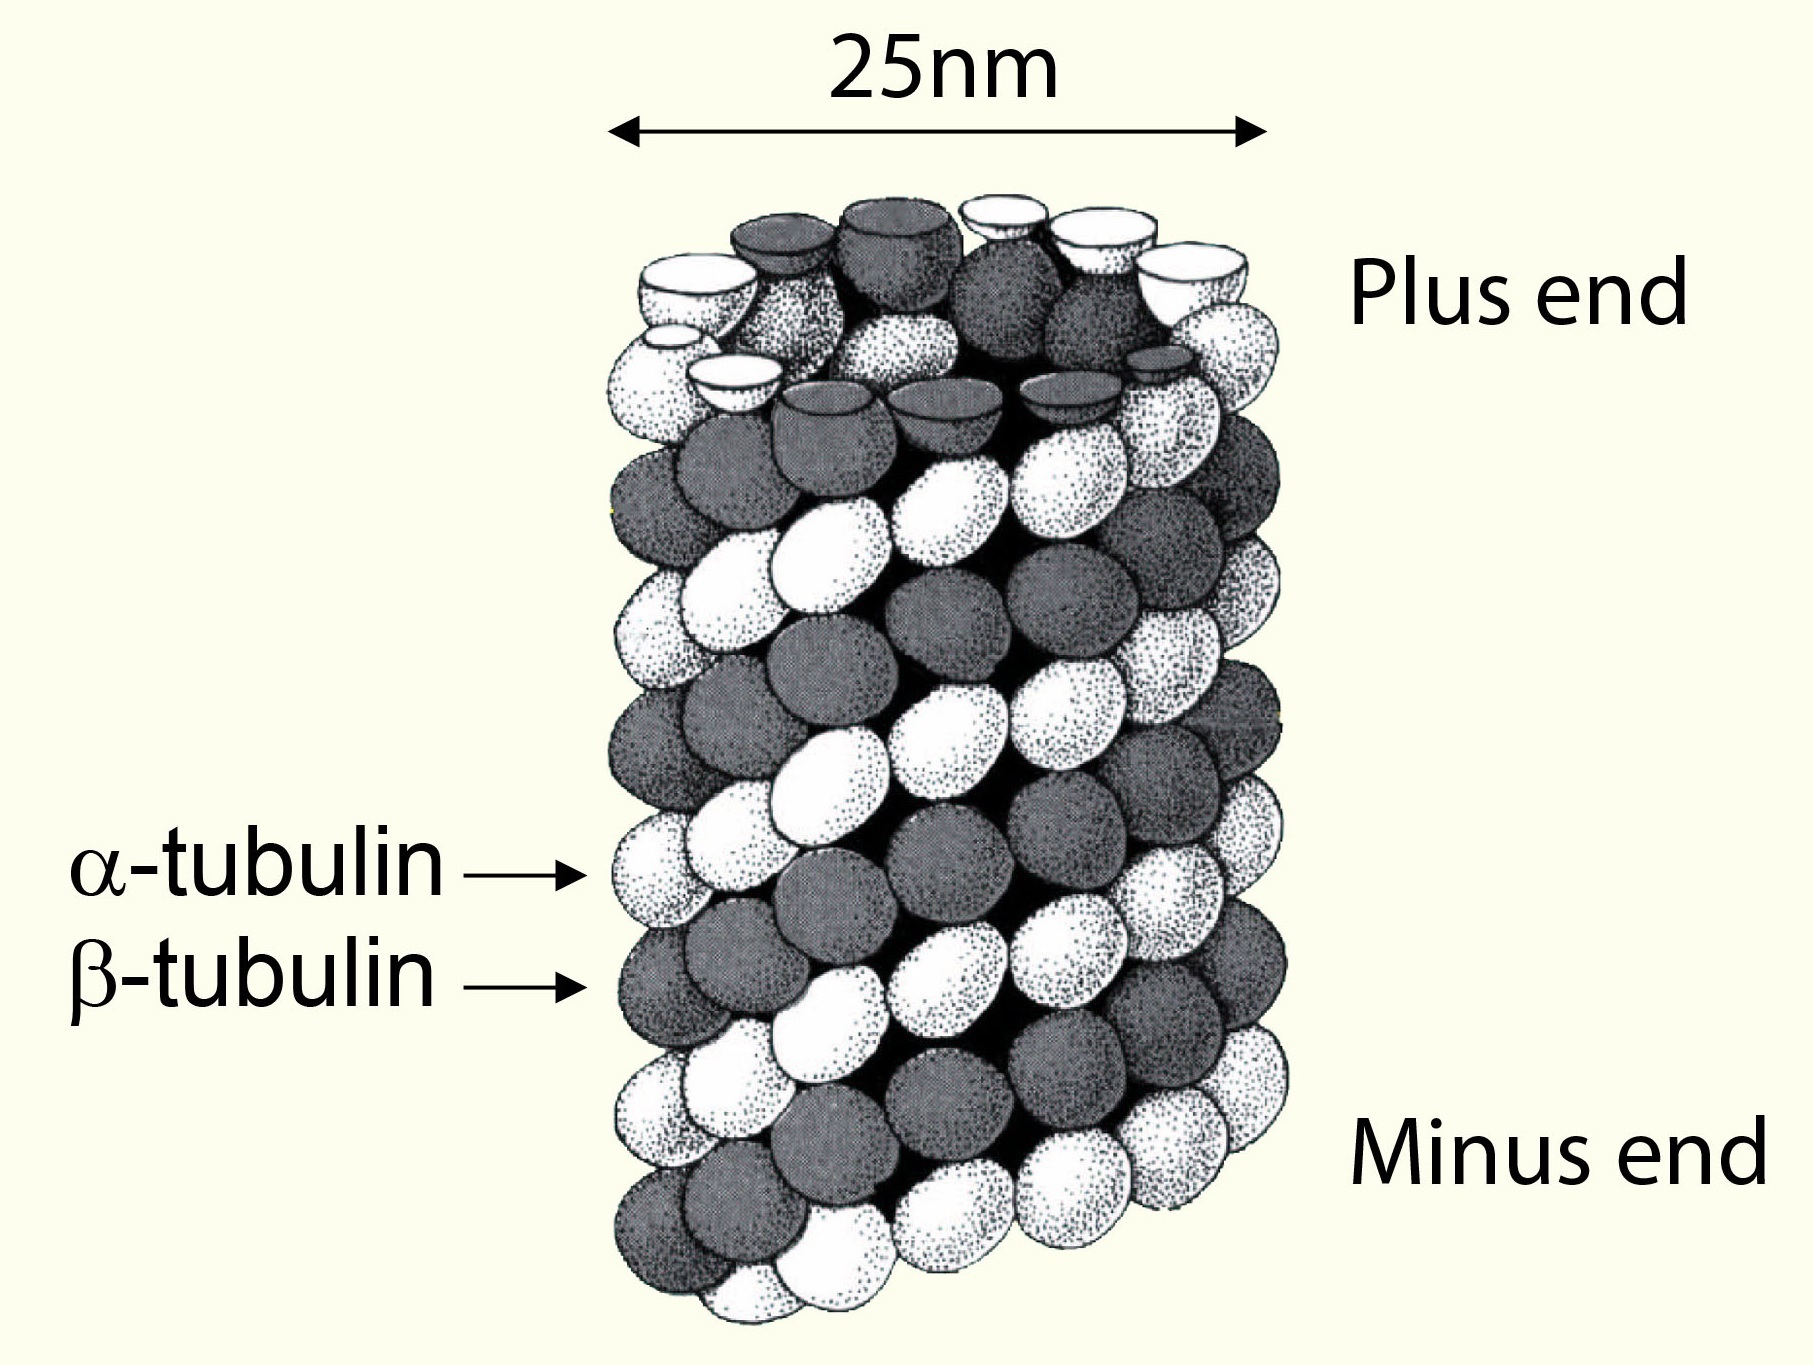 Tubulin / Microtubules: Structure and polarity of microtubules